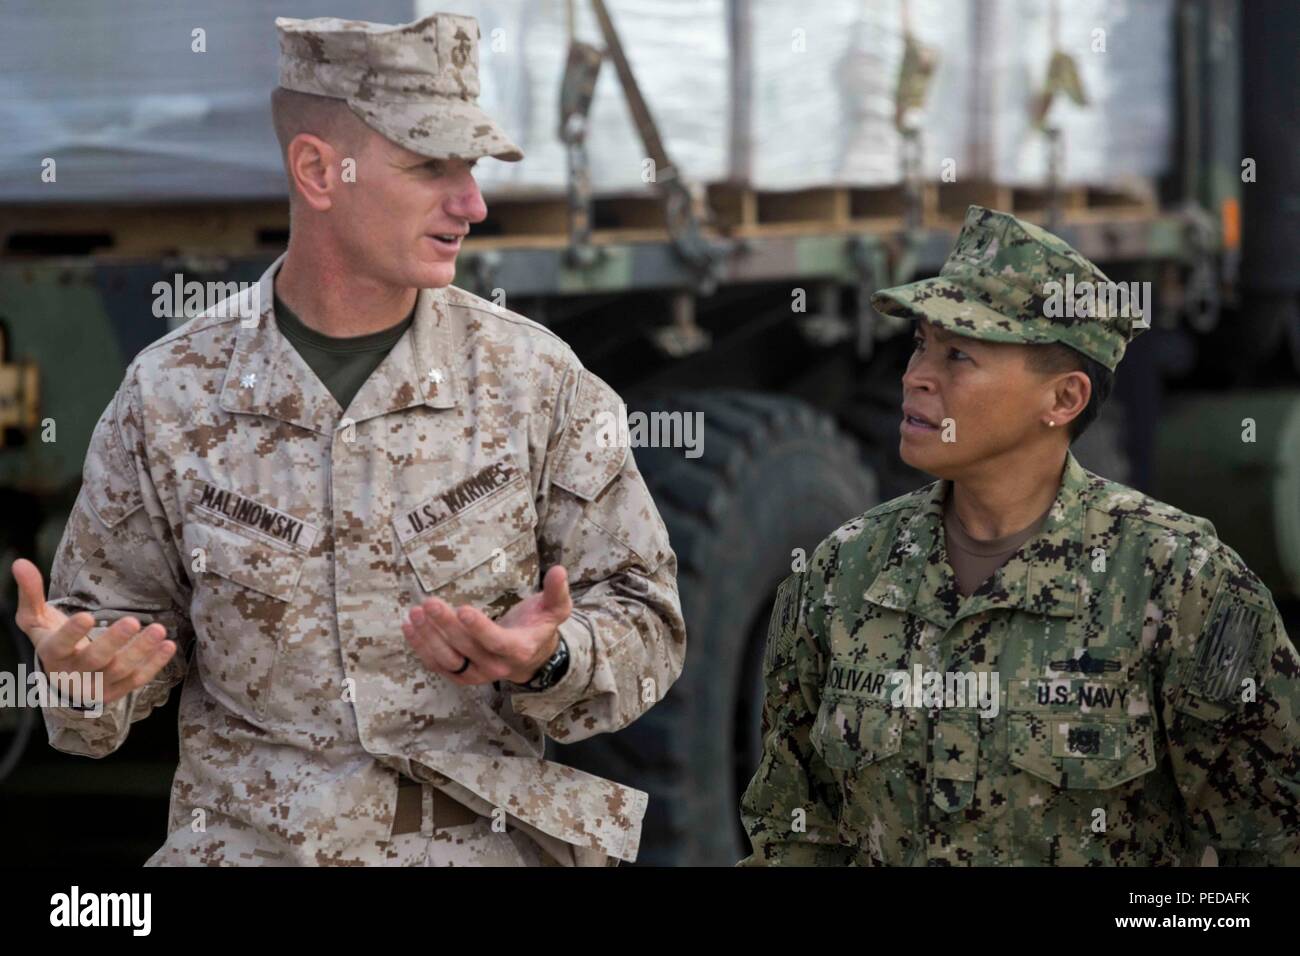 U.S. Marine Lt. Col. Eric Malinowski, the commanding officer of Combat Logistics Battalion 31, 31st Marine Expeditionary Unit, speaks with U.S. Navy Rear Adm. Bette Bolivar, the commander of U.S. Naval Forces Marianas, about typhoon relief efforts in Saipan, Aug. 9, 2015. The Marines and sailors of the 31st MEU and the ships of the Bonhomme Richard Amphibious Ready Group are assisting the Federal Emergency Management Agency with distributing emergency relief supplies to Saipan. Saipan, the most populated island in the Commonwealth of the Northern Mariana Islands, was struck by Typhoon Soudelor Stock Photo